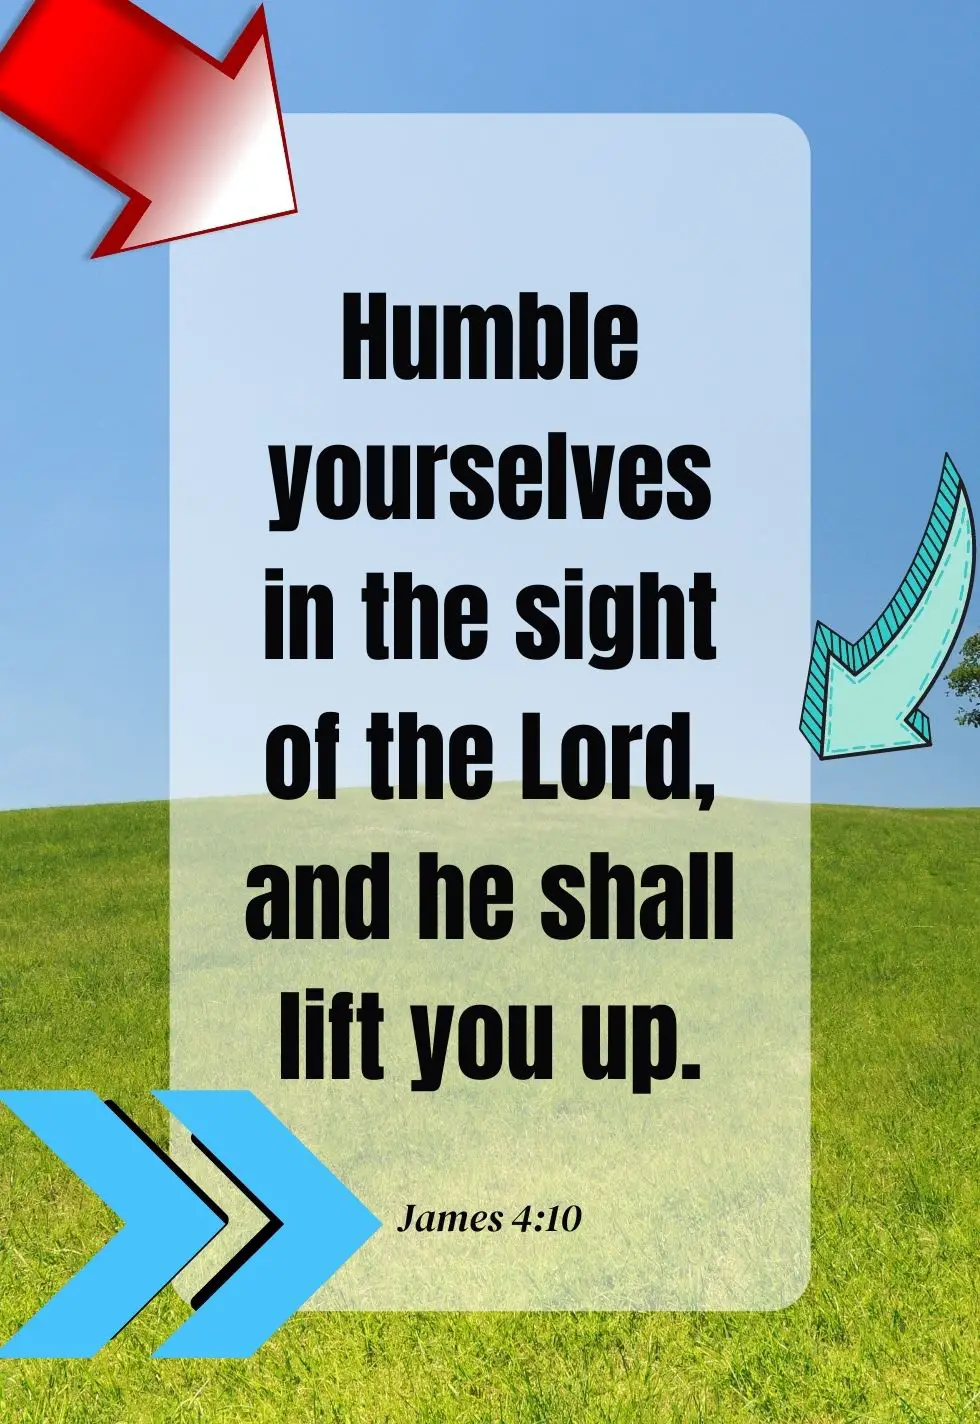 Bible Verses About Humbleness - Bible Verse of the Day